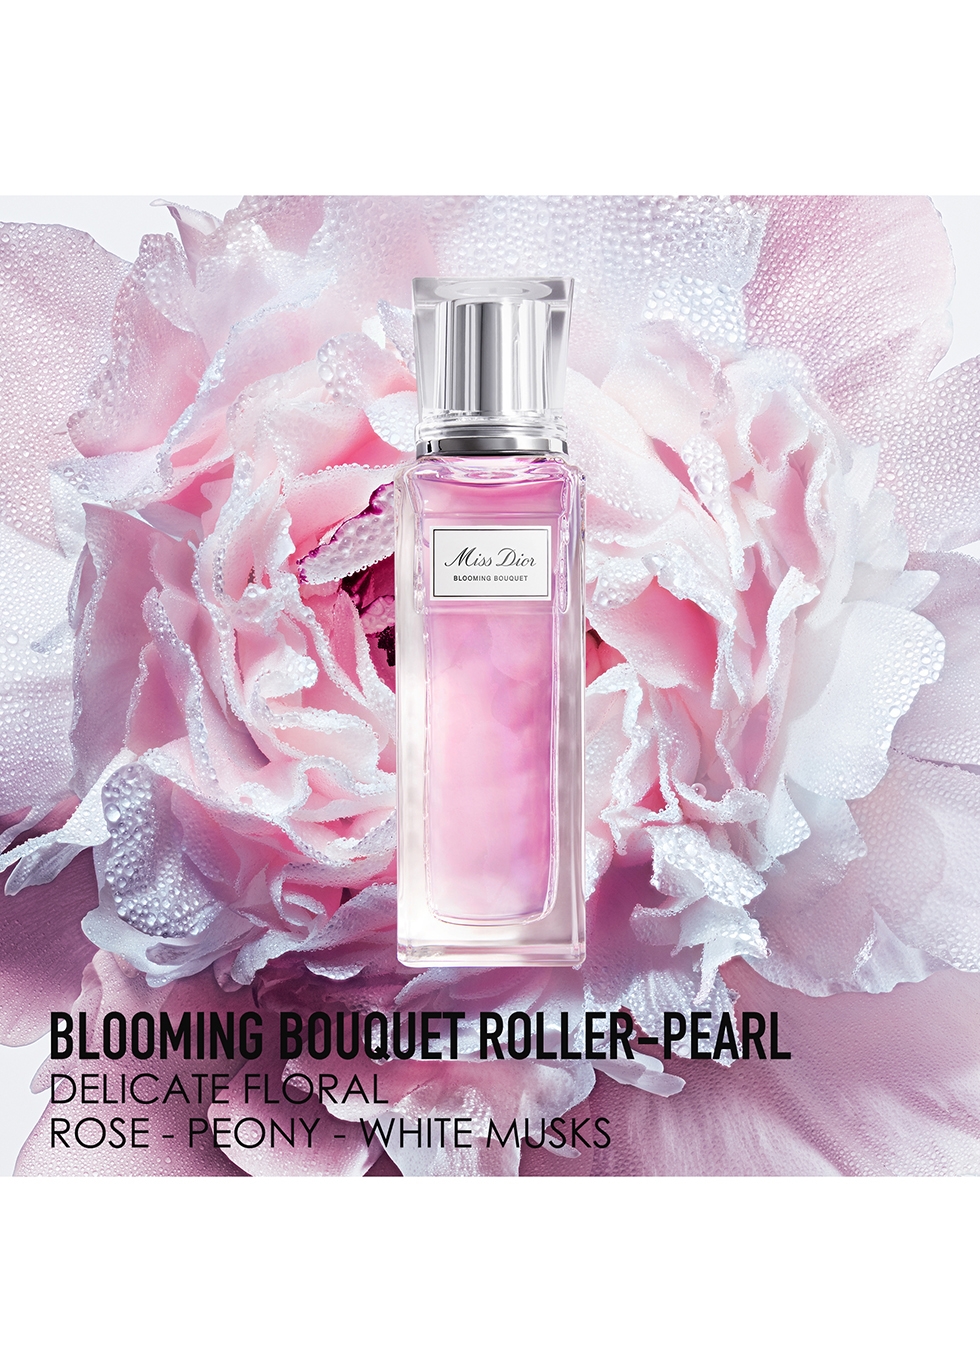 miss dior blooming bouquet roller pearl 20 ml